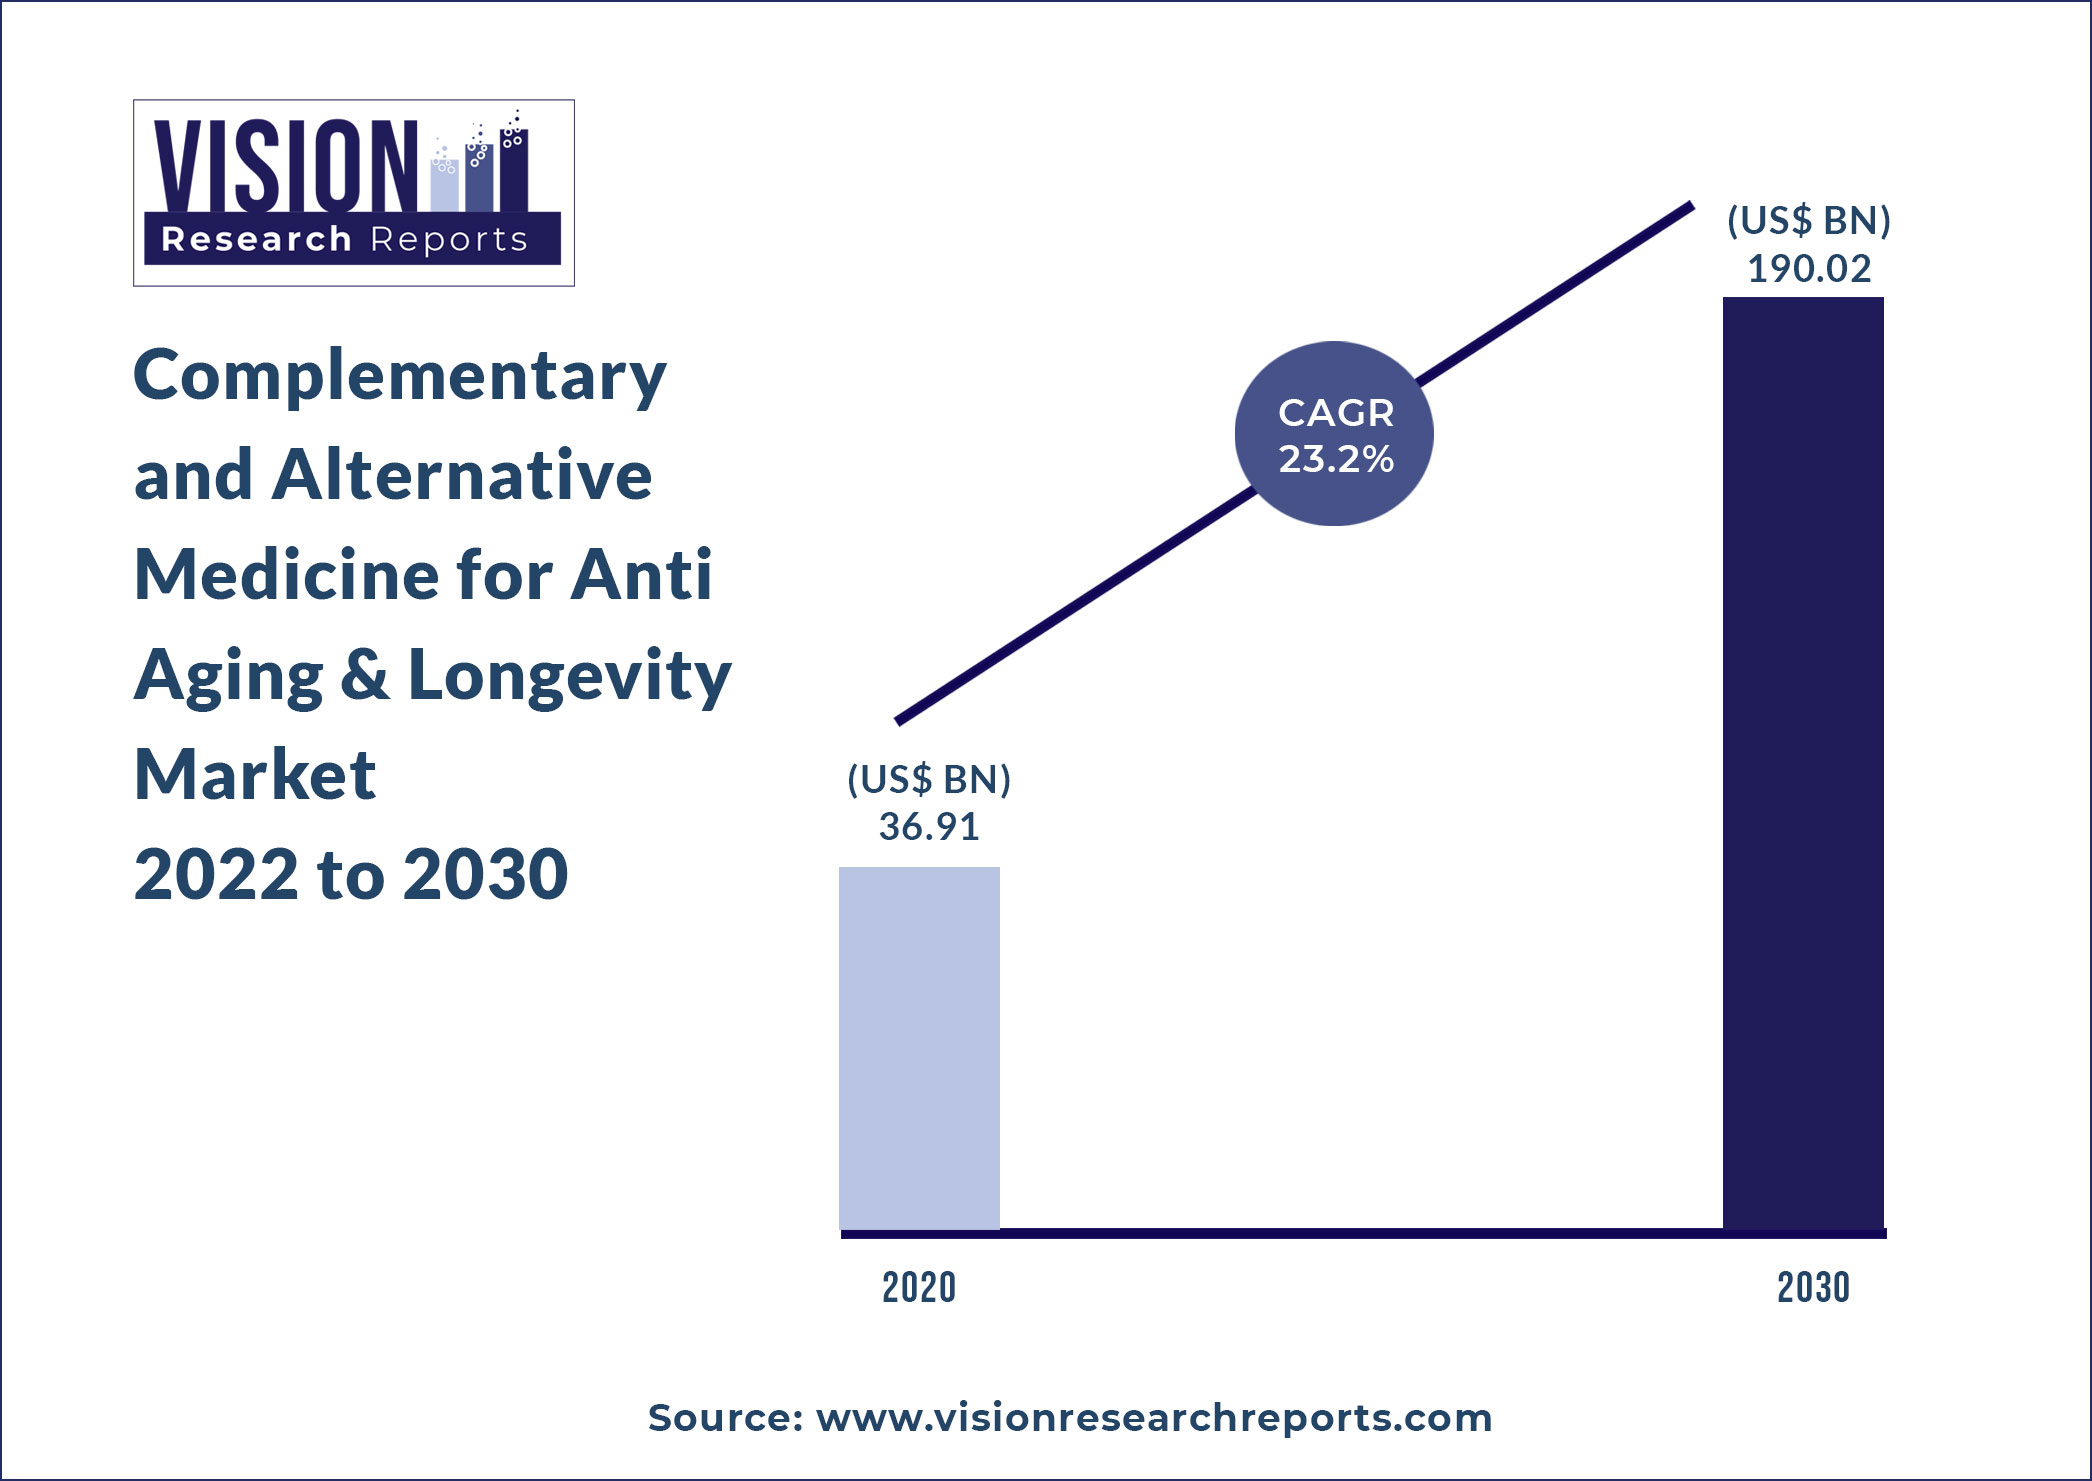 Complementary and Alternative Medicine for Anti Aging & Longevity Market Size 2022 to 2030